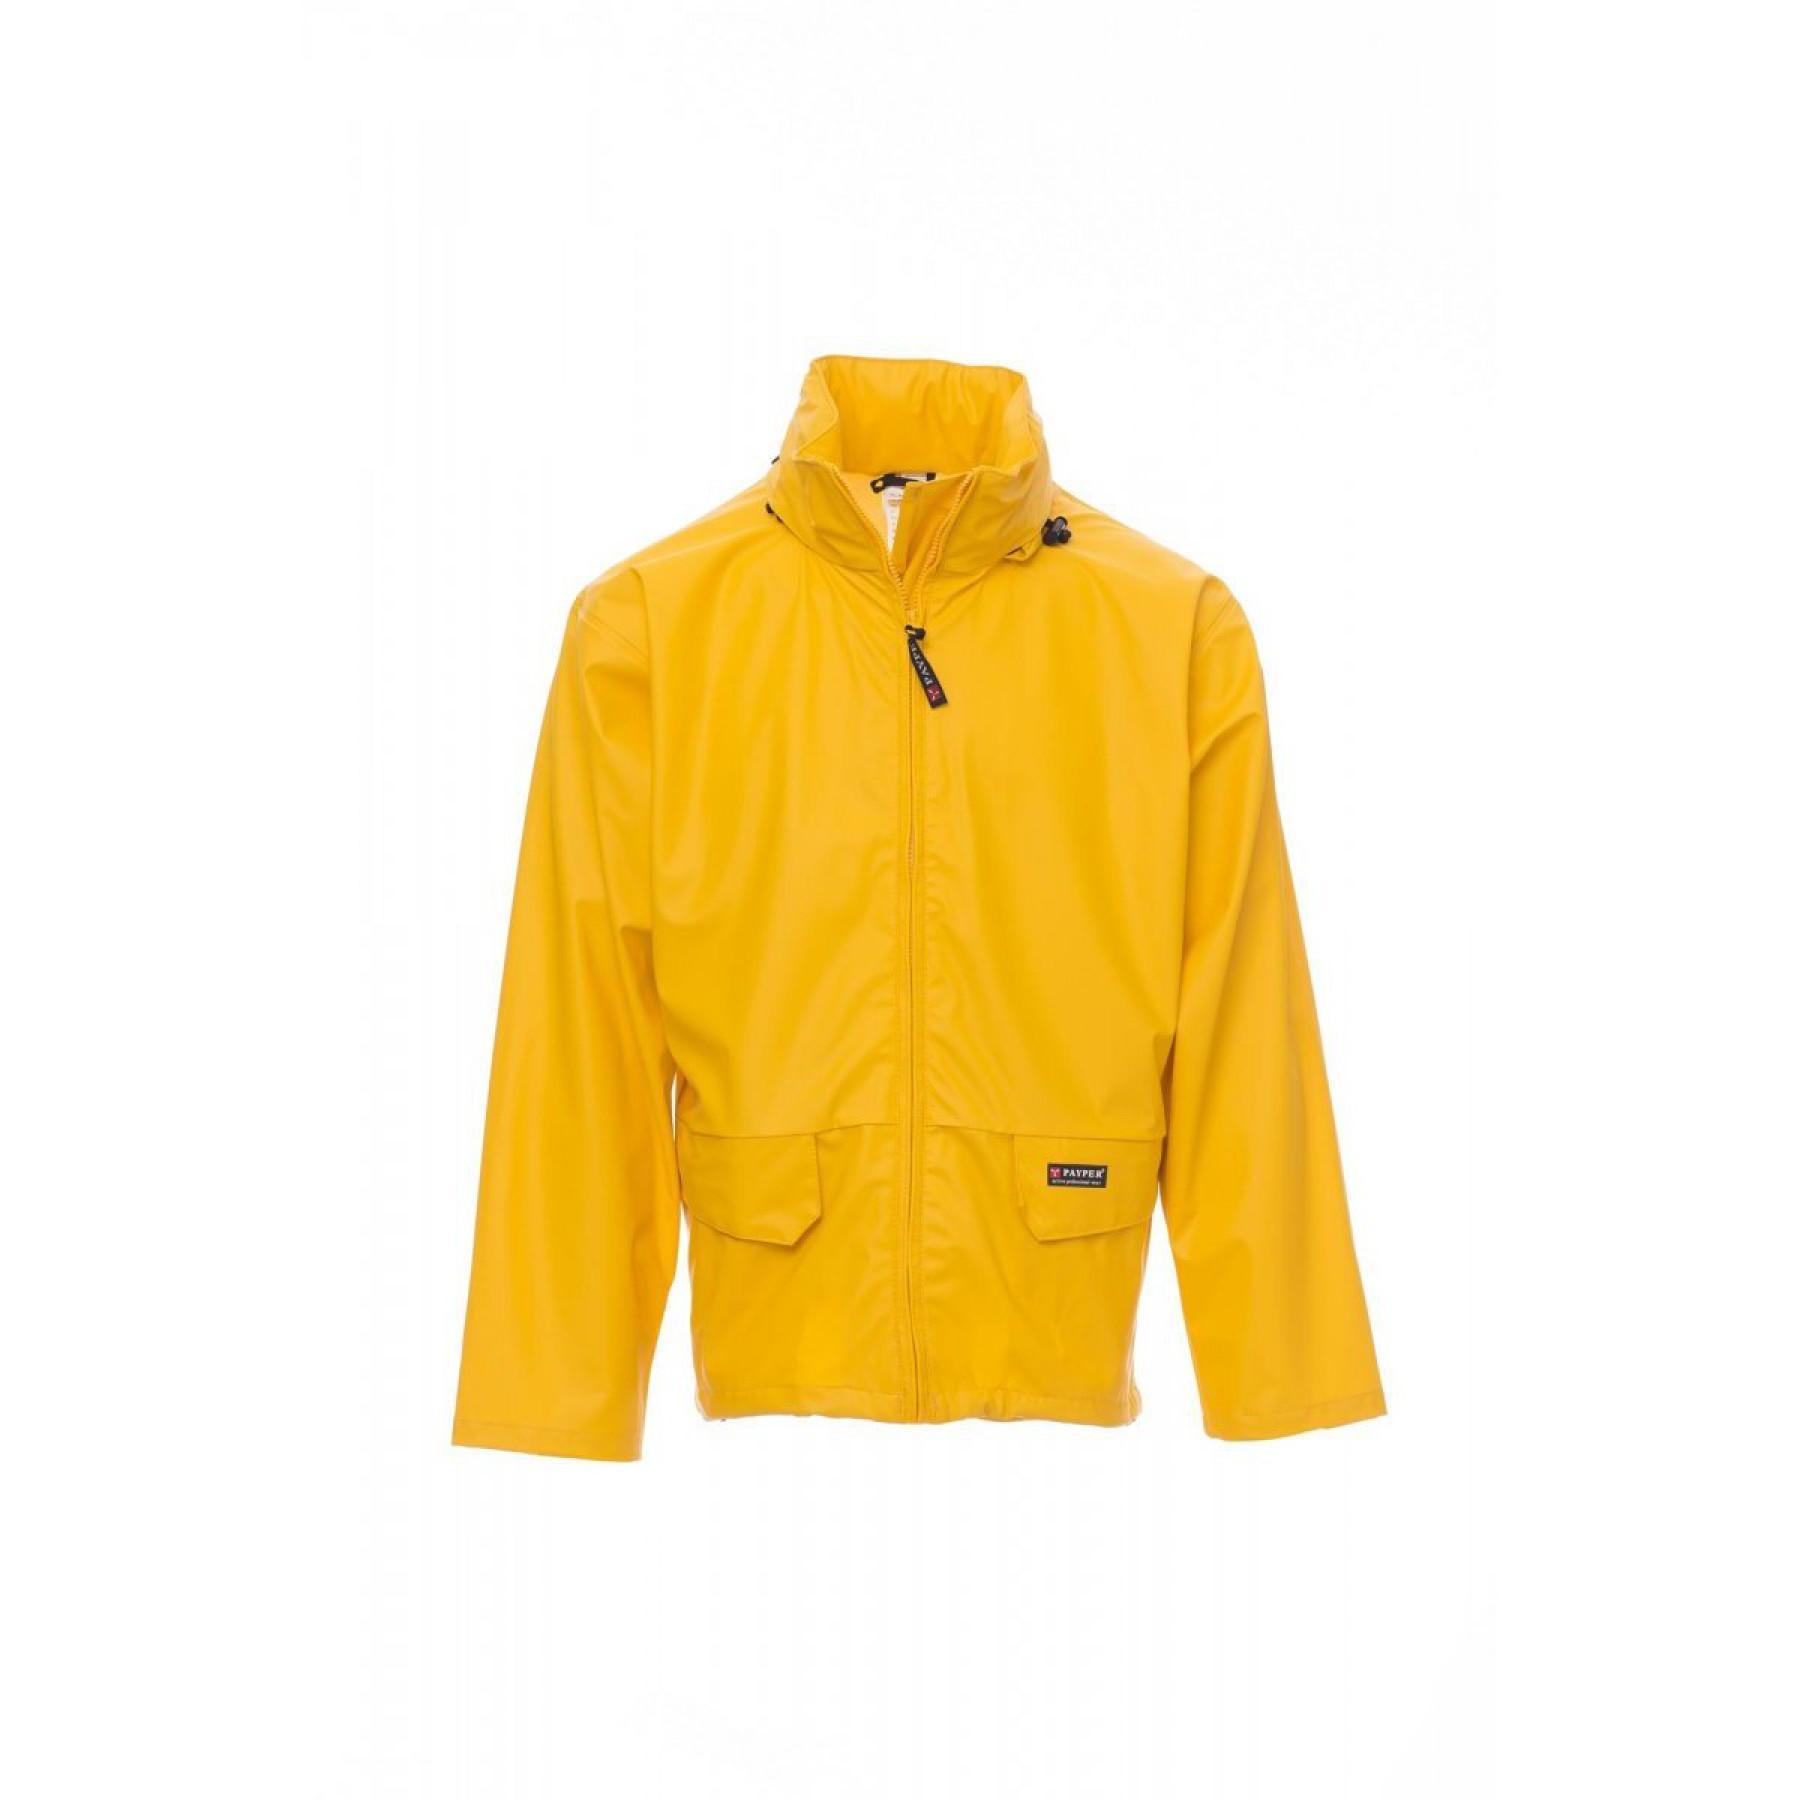 Chaqueta impermeable Payper Dry-jacket